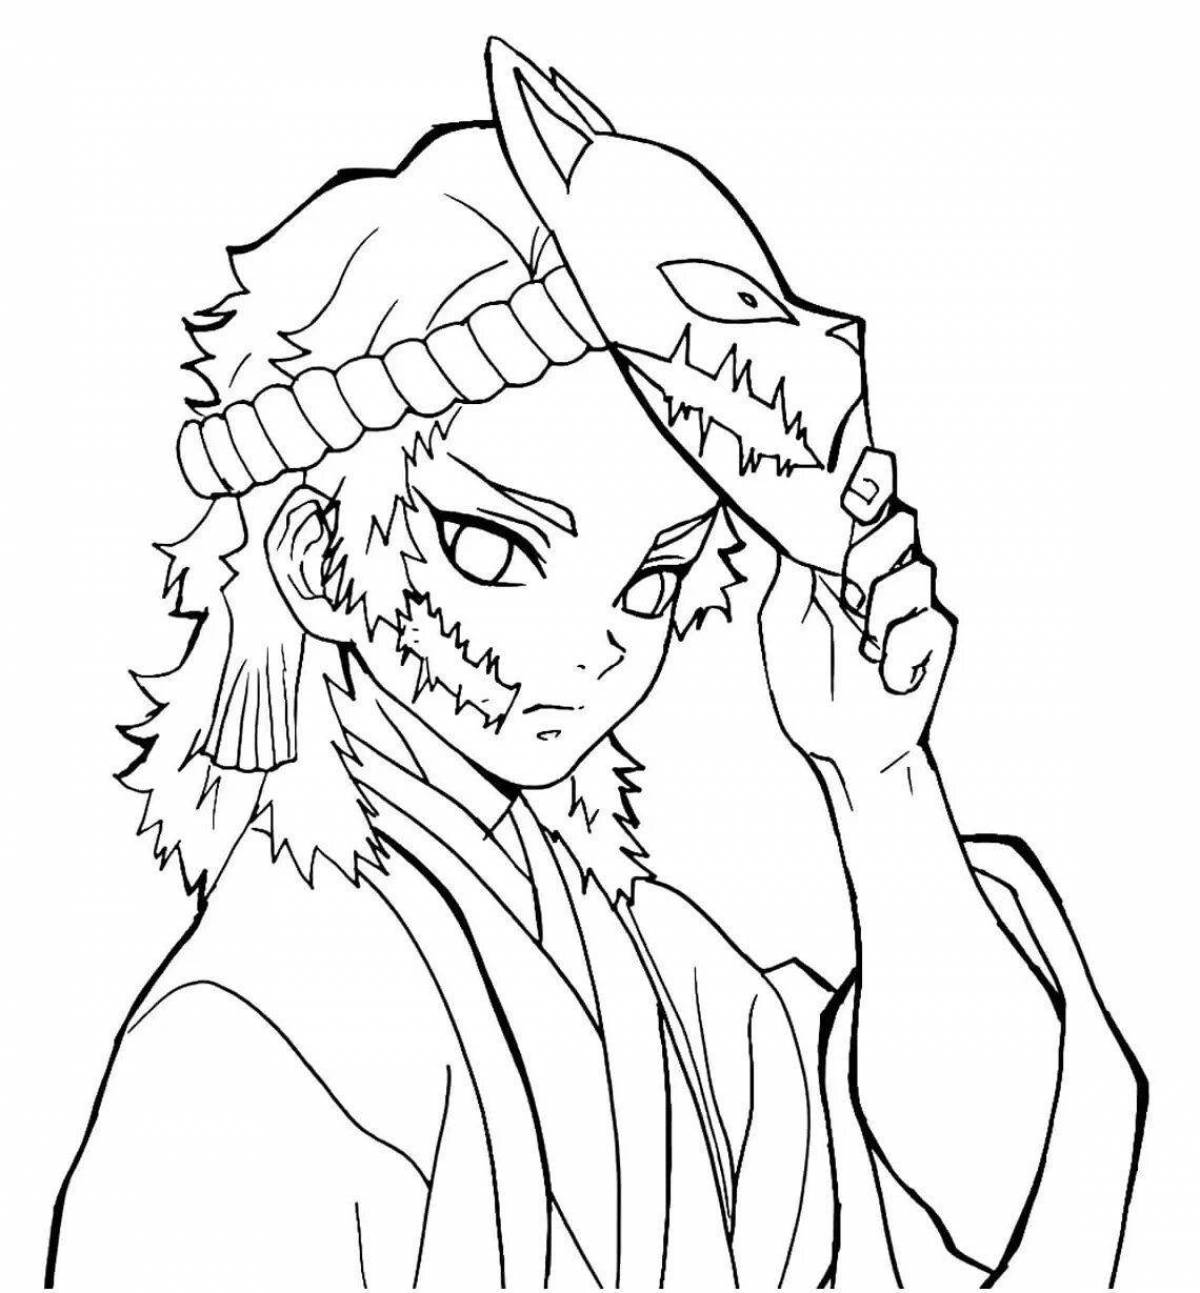 Cute demon slayer coloring page